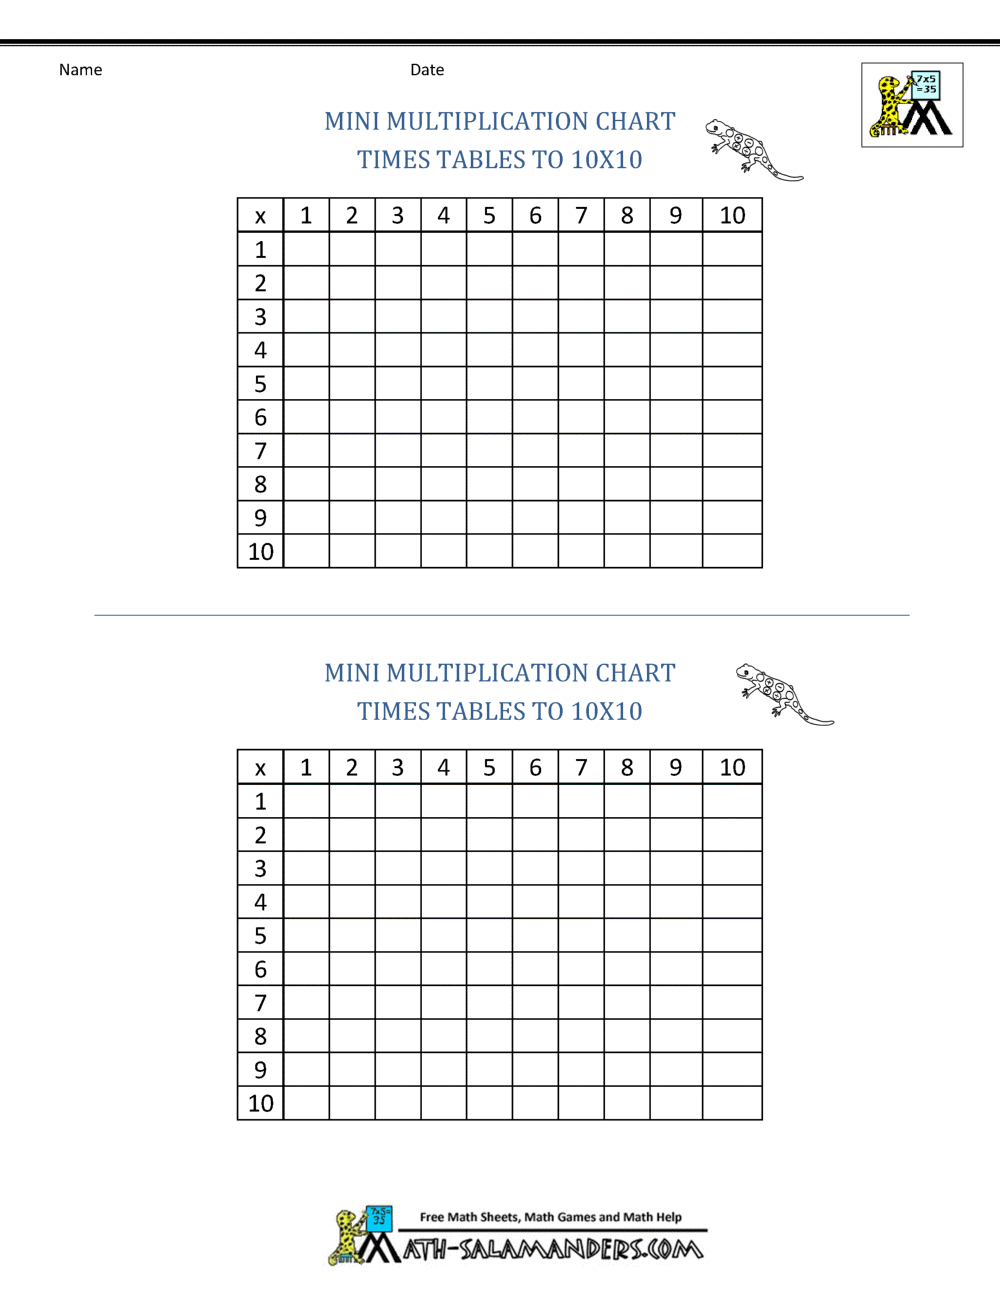 Multiplication Times Table Chart